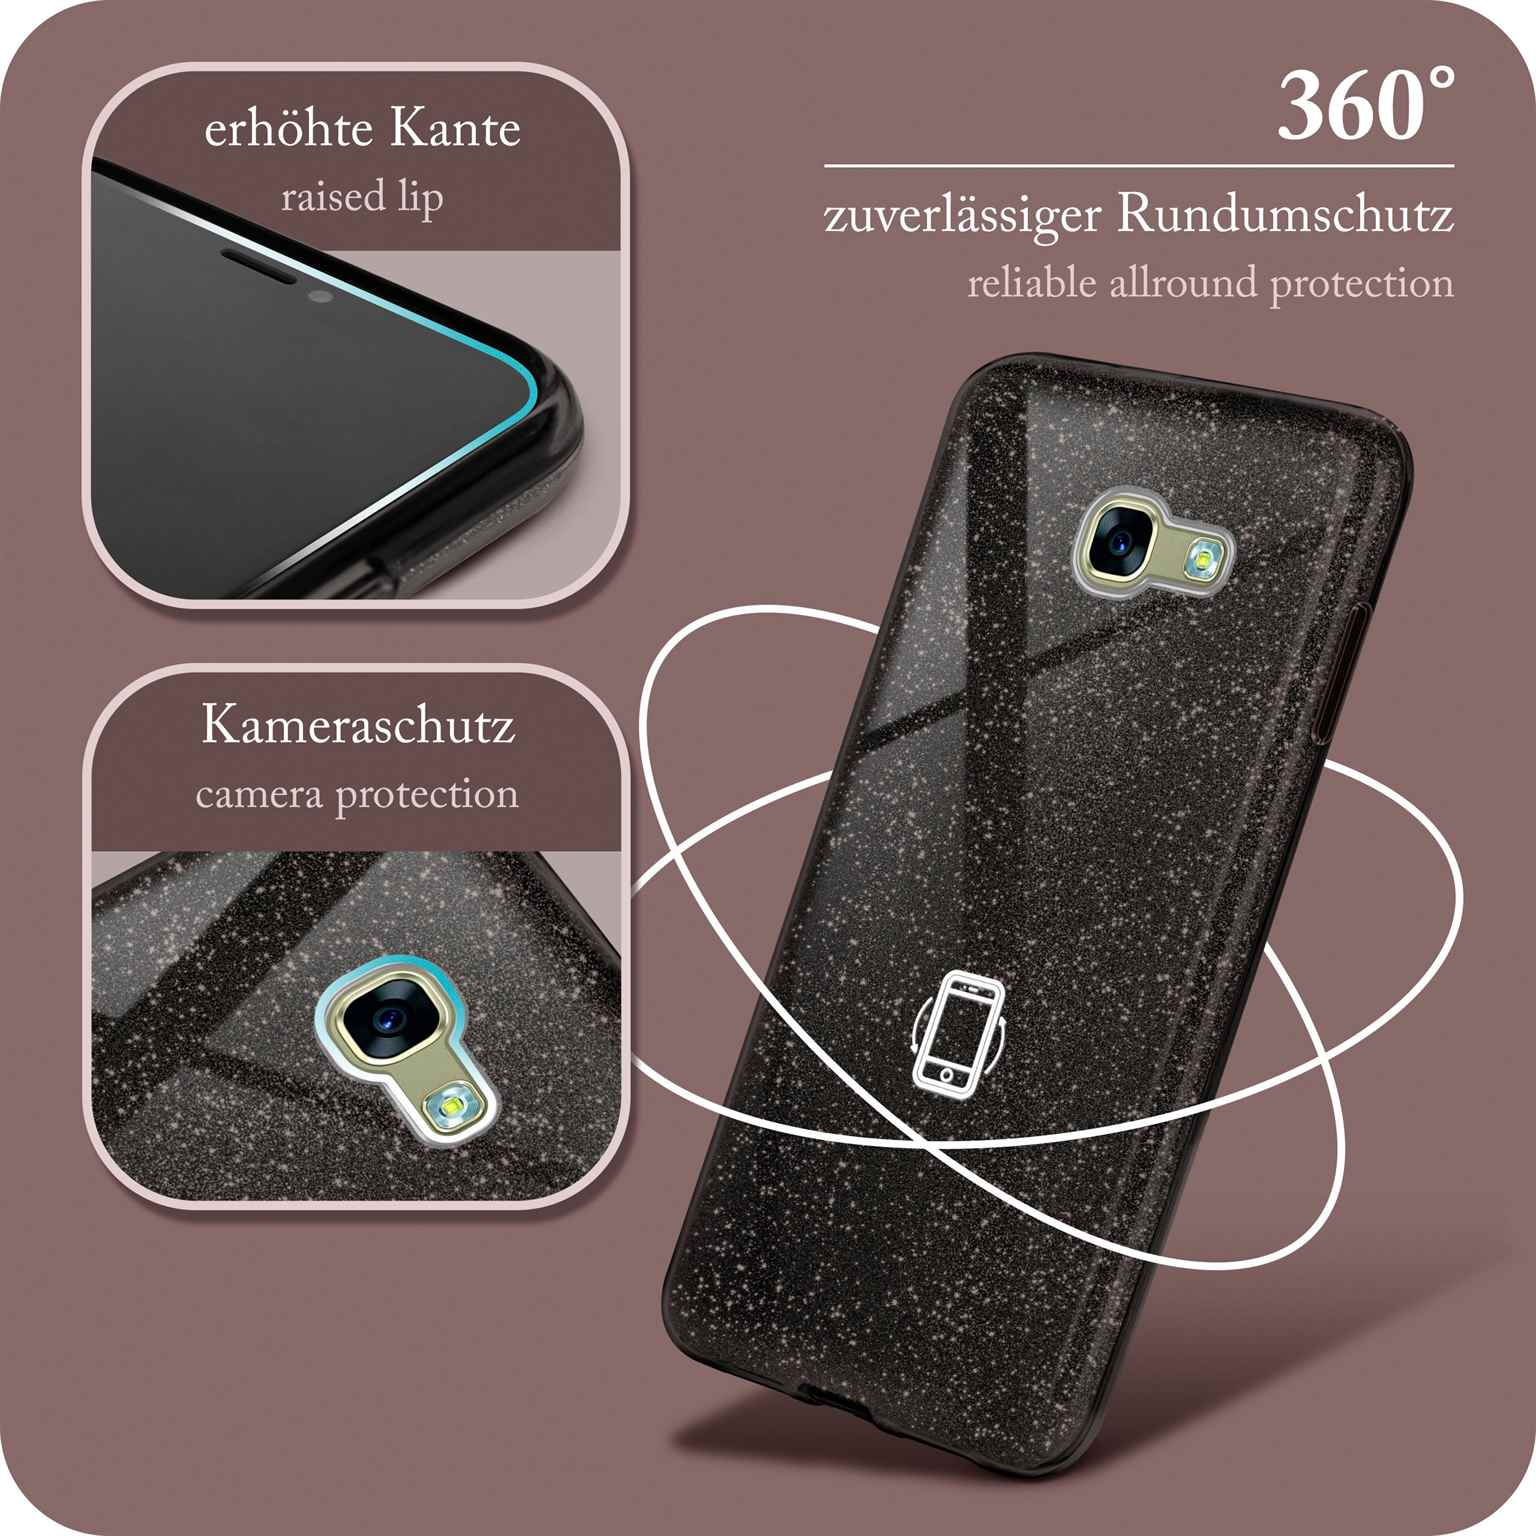 Backcover, ONEFLOW - Galaxy Glitter Case, Glamour Samsung, (2017), Black A3